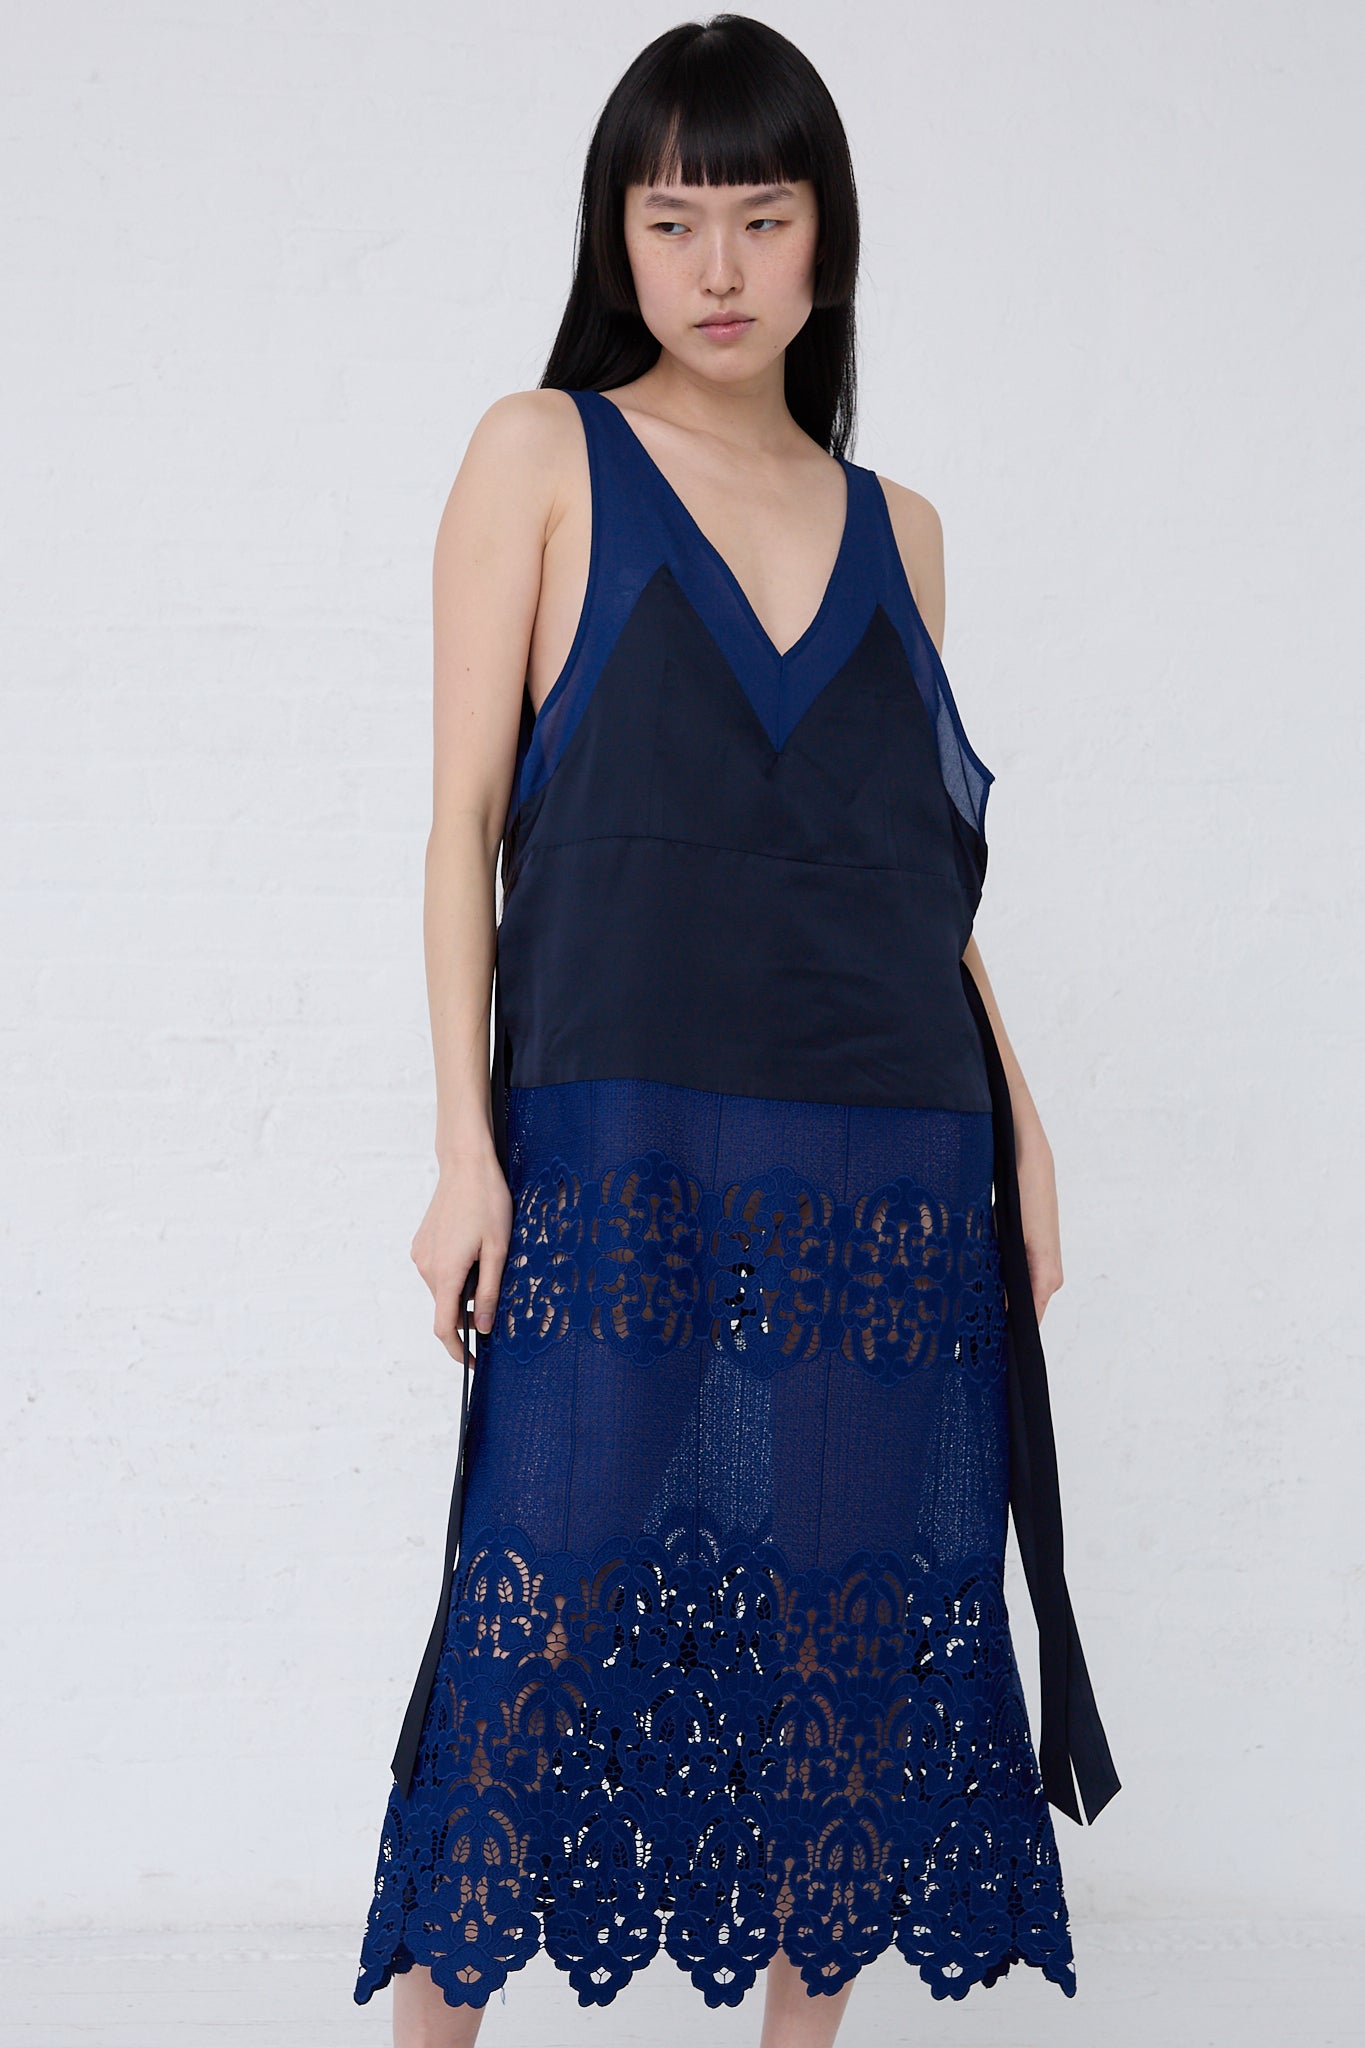 The model is wearing a TOGA PULLA Mesh Lace Dress in Blue.